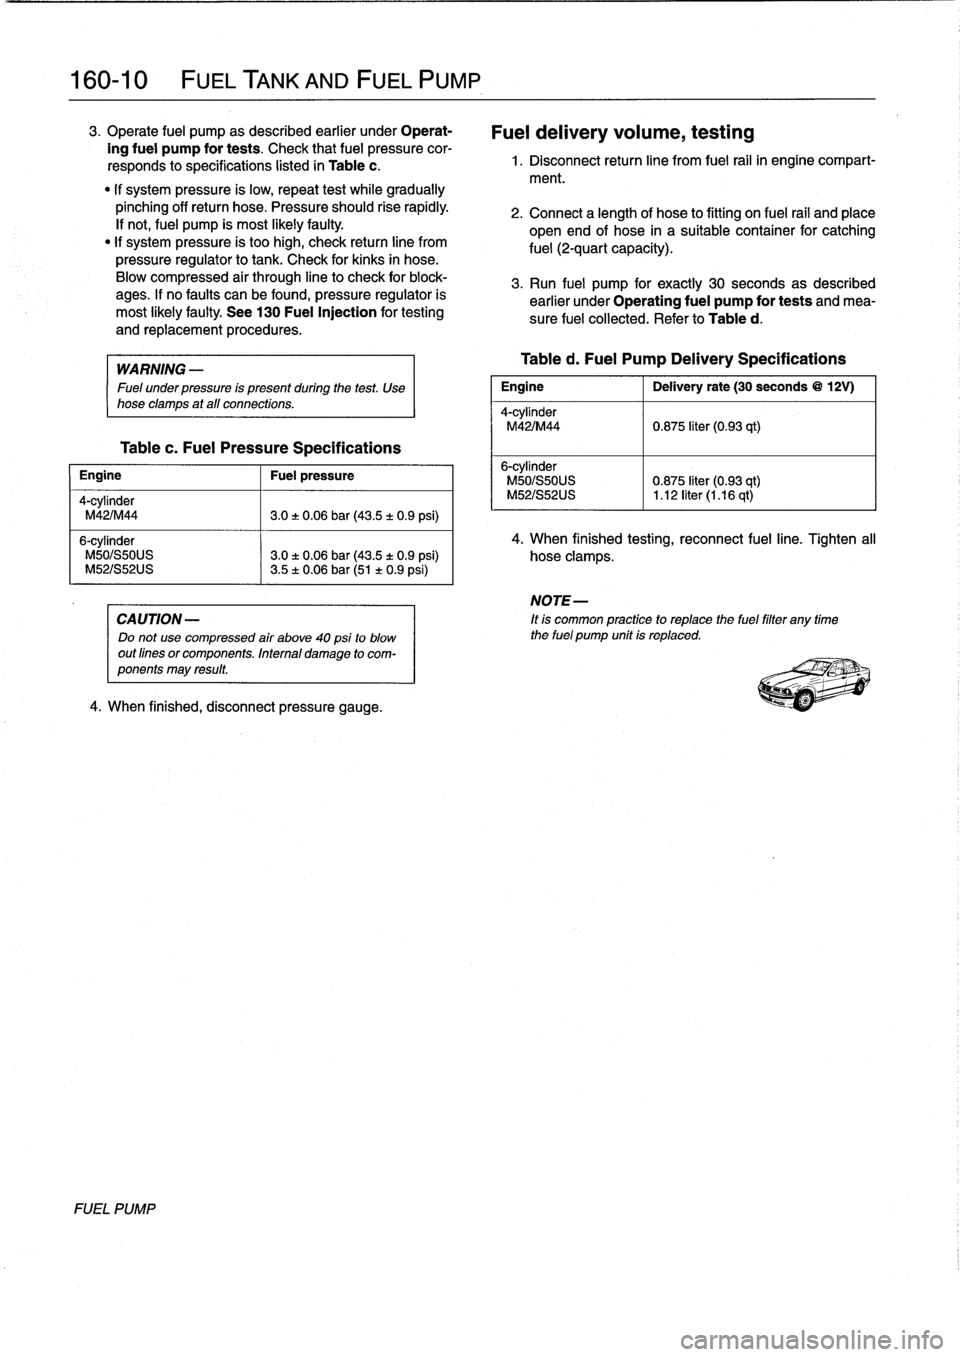 BMW 318i 1995 E36 Workshop Manual 
160-
1
0

	

FUEL
TANK
AND
FUEL
PUMP

3
.
Operate
fuel
pump
as
described
earlier
under
Operat-

ing
fuel
pump
for
tests
.
Check
that
fuel
pressure
cor-

responds
to
specifications
listed
in
Table
c
.